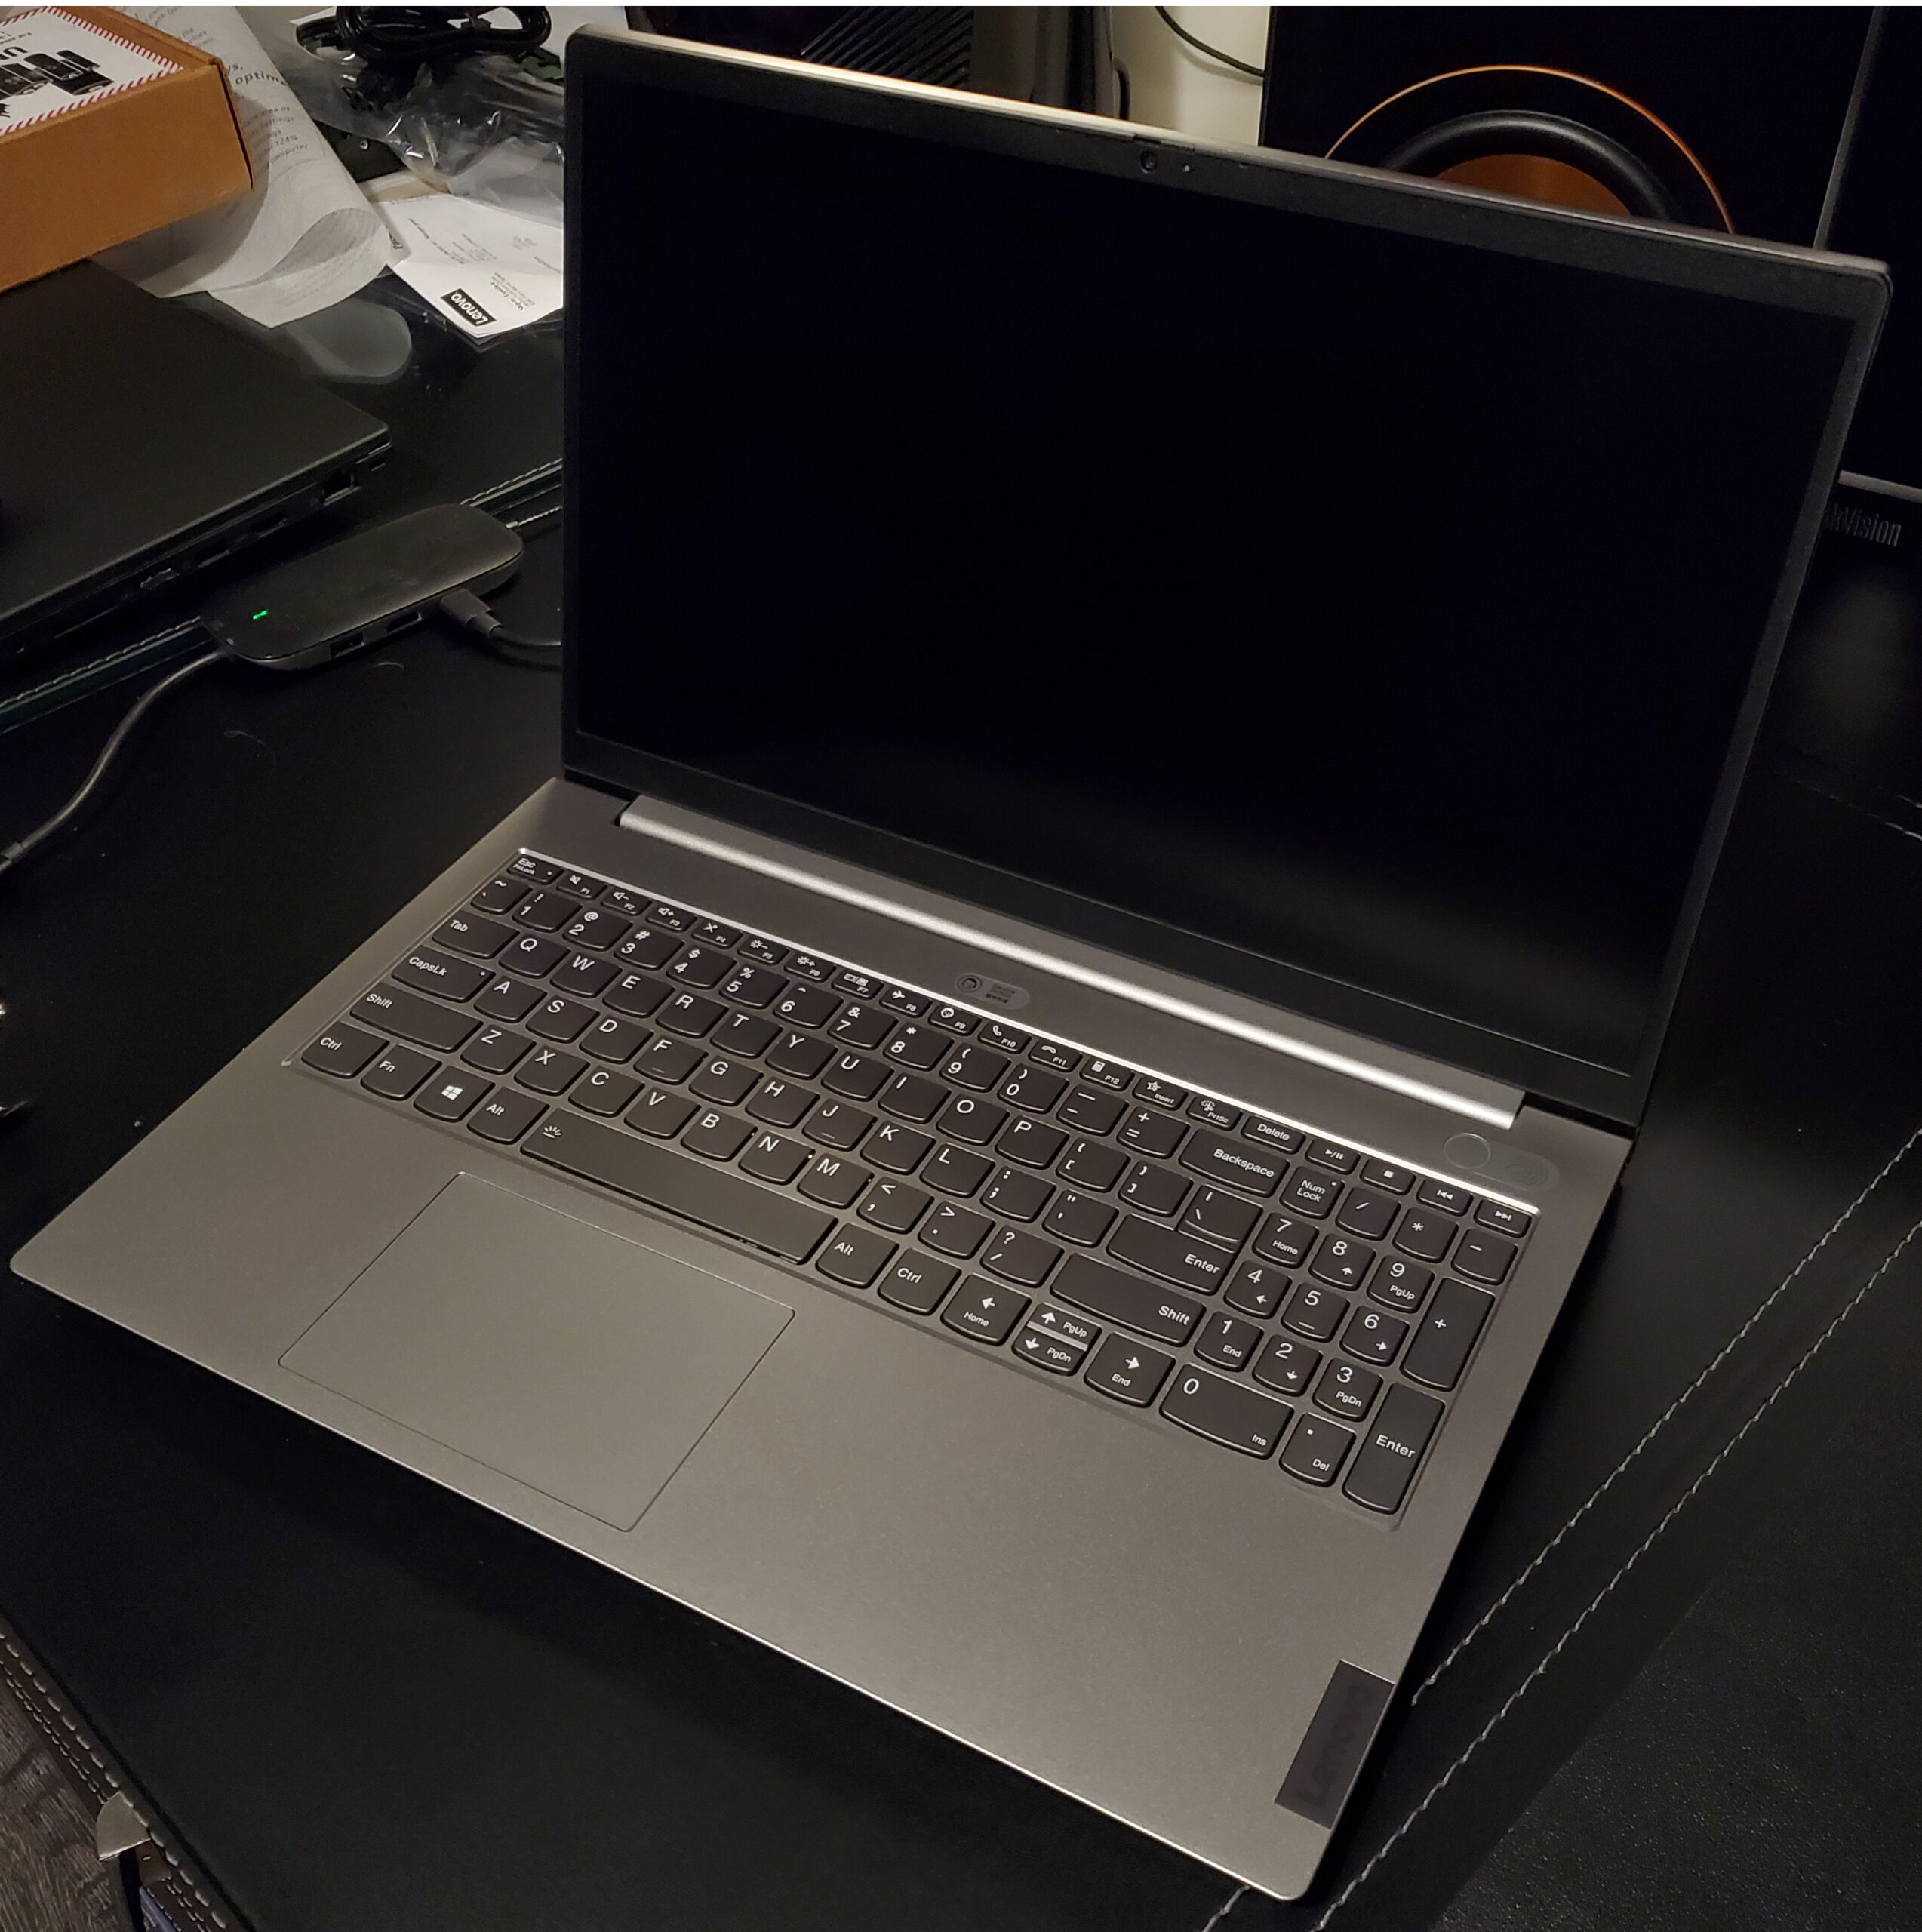 2021 Linux Review of the Lenovo ThinkBook 15 Gen 2 AMD